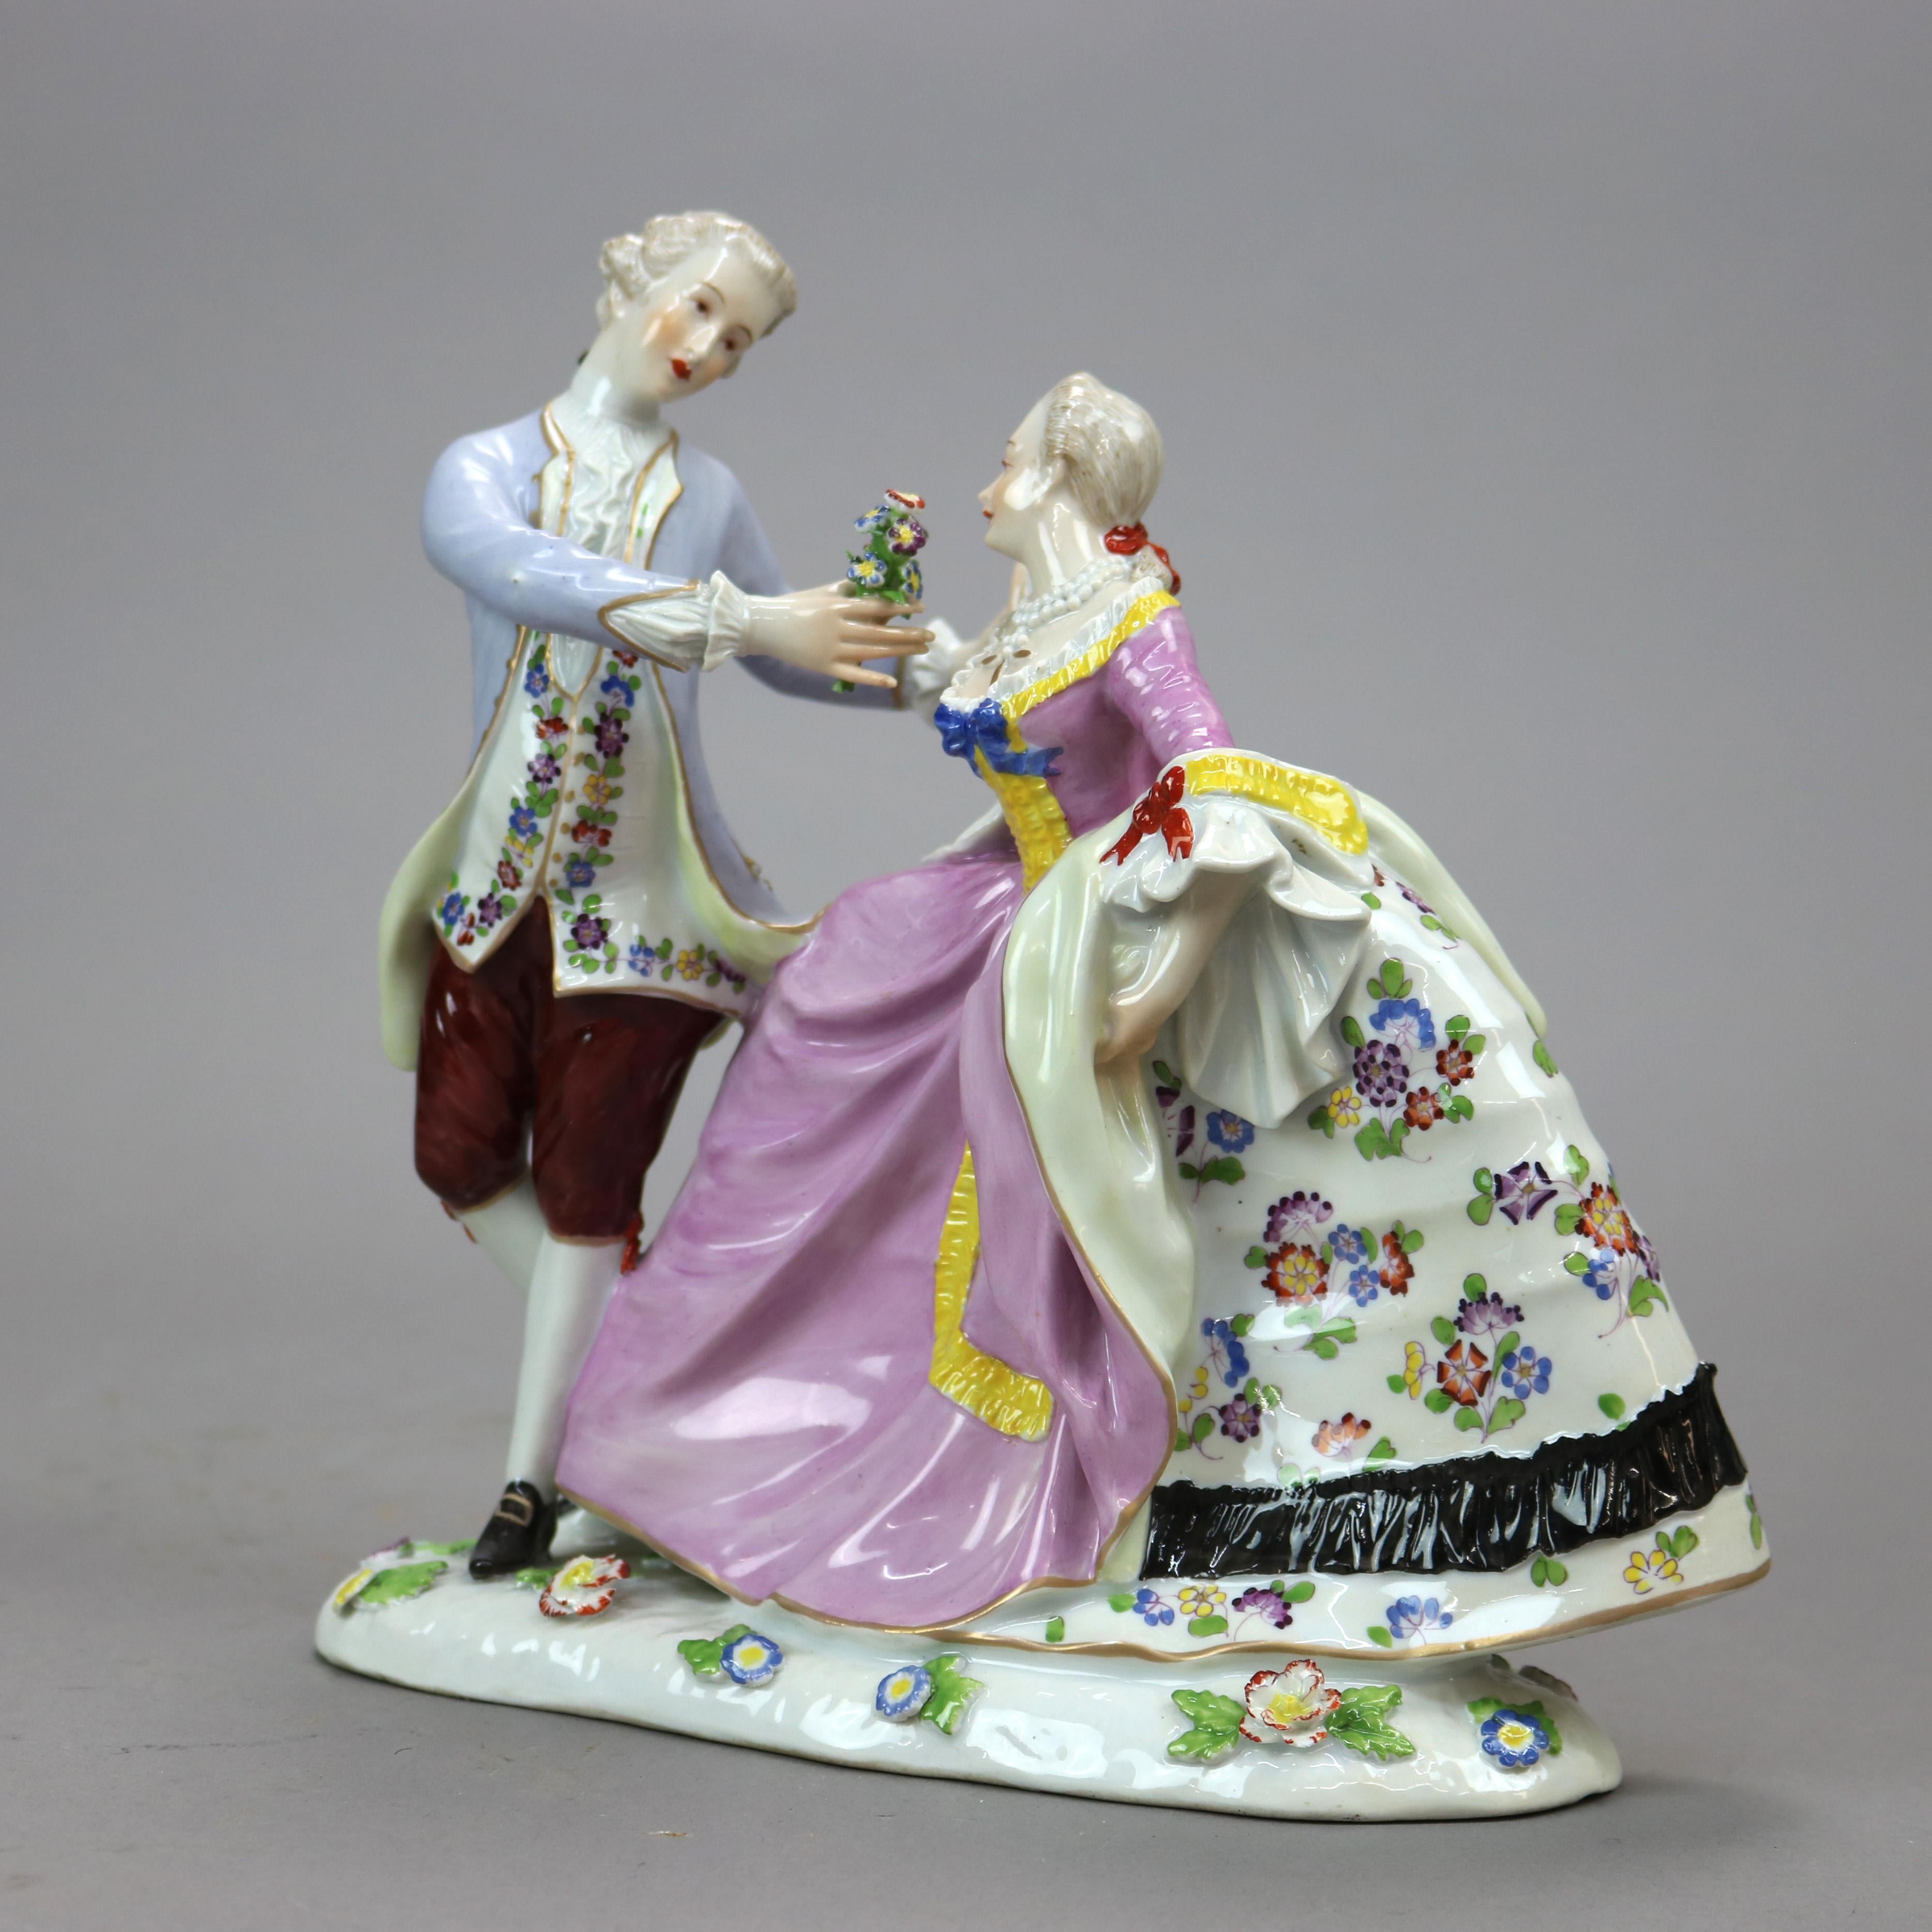 An antique German figural group in the manner of Meissen offers hand painted and gilt porcelain courting scene with young man and woman in countryside setting, early 20th century

Measures - 8.25'' H x 8.75'' W x 4'' D.